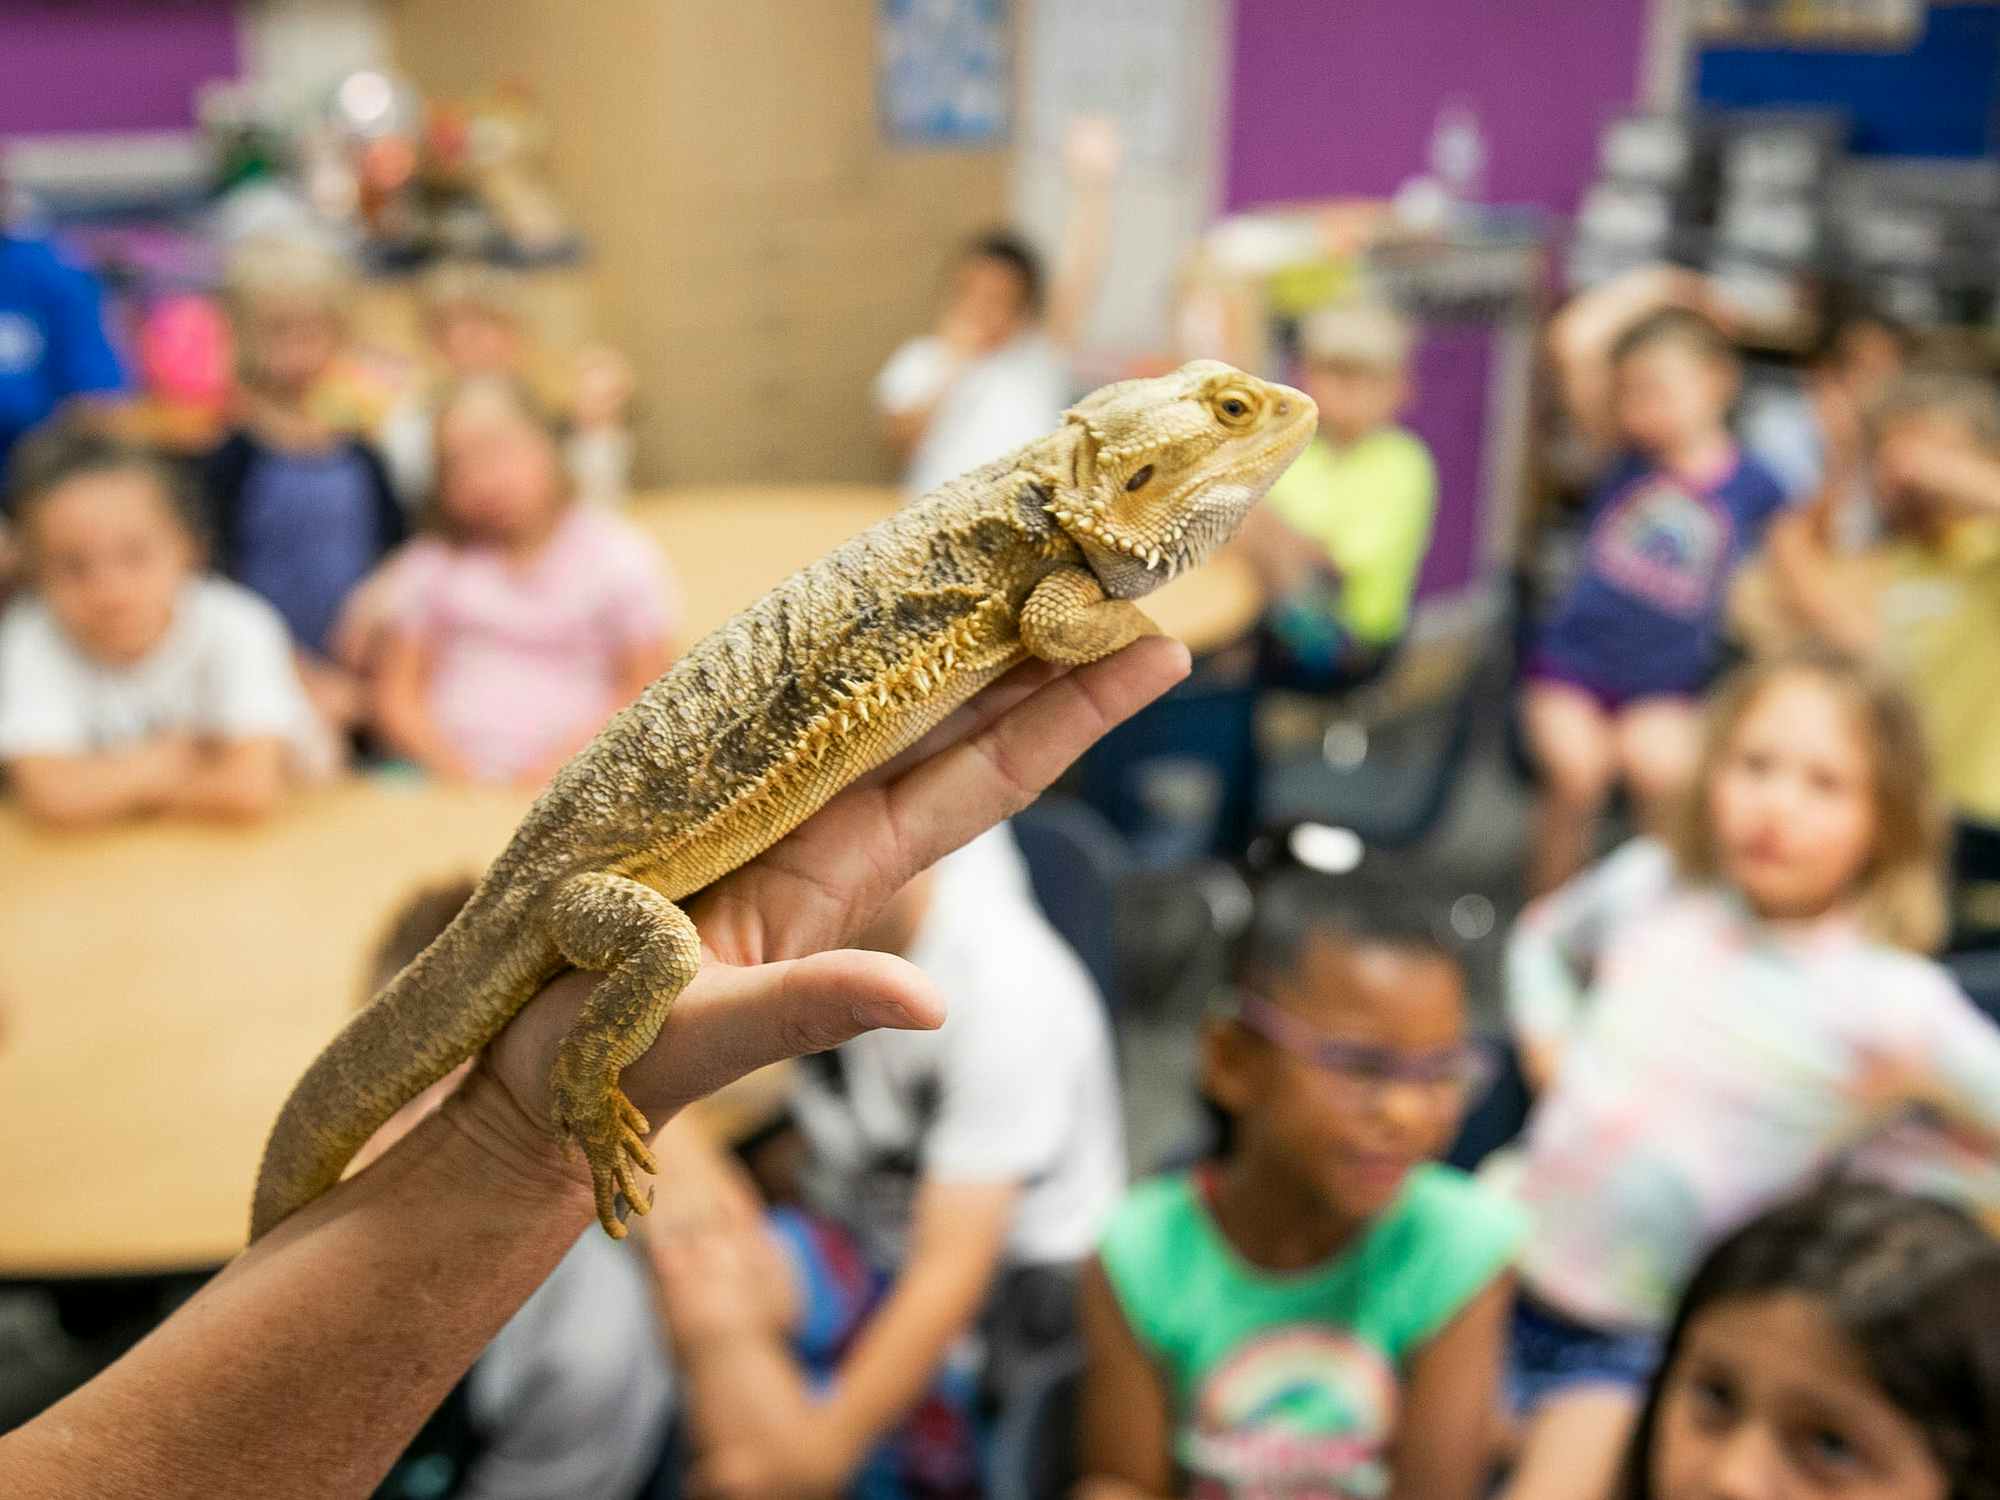 children in a classroom with a bearded dragon classroom pet